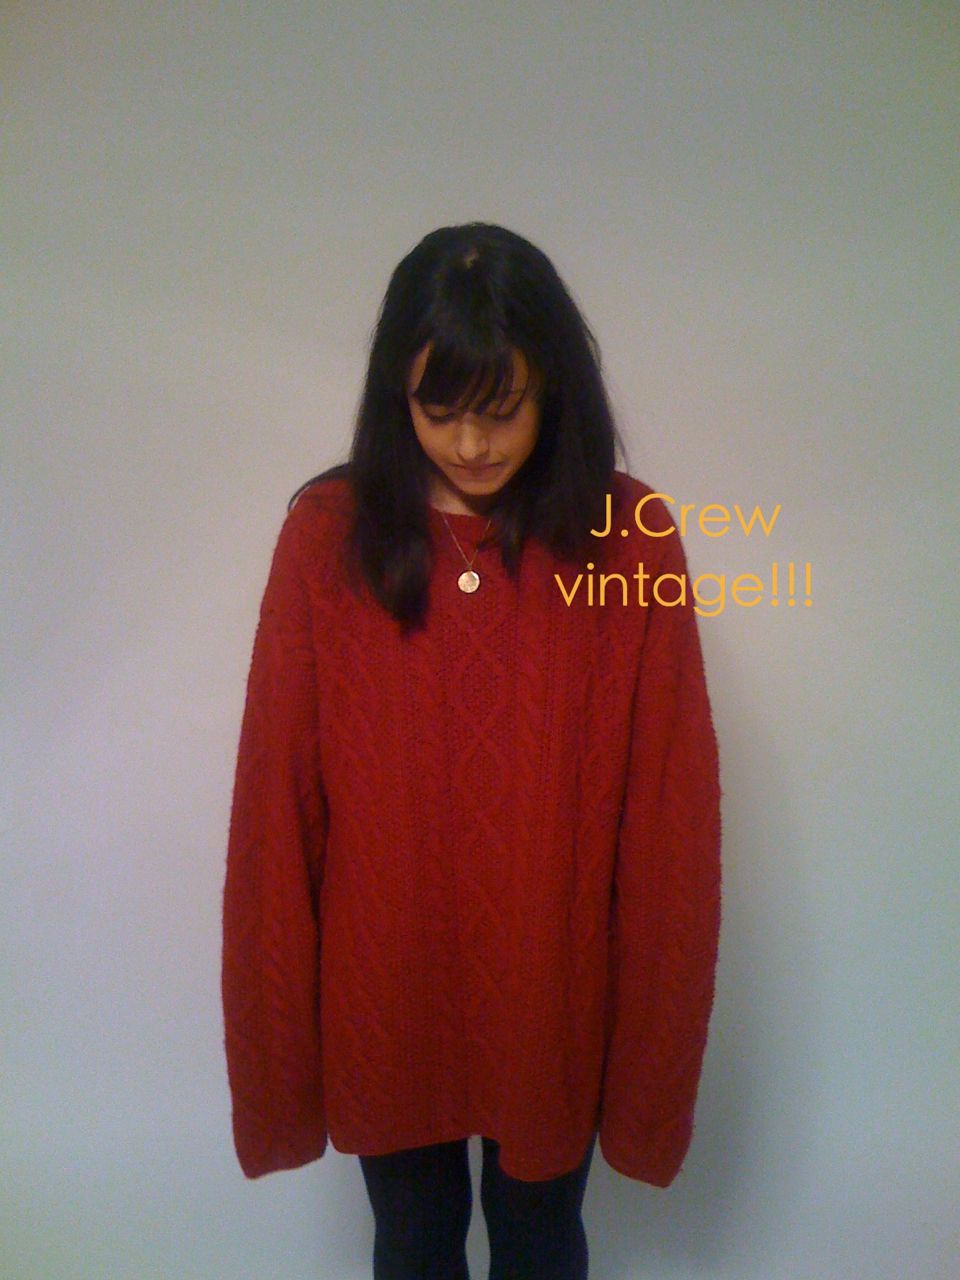 <!--:en-->J .Crew Vintage pieces!!!that stand the test of time!!!!<!--:-->